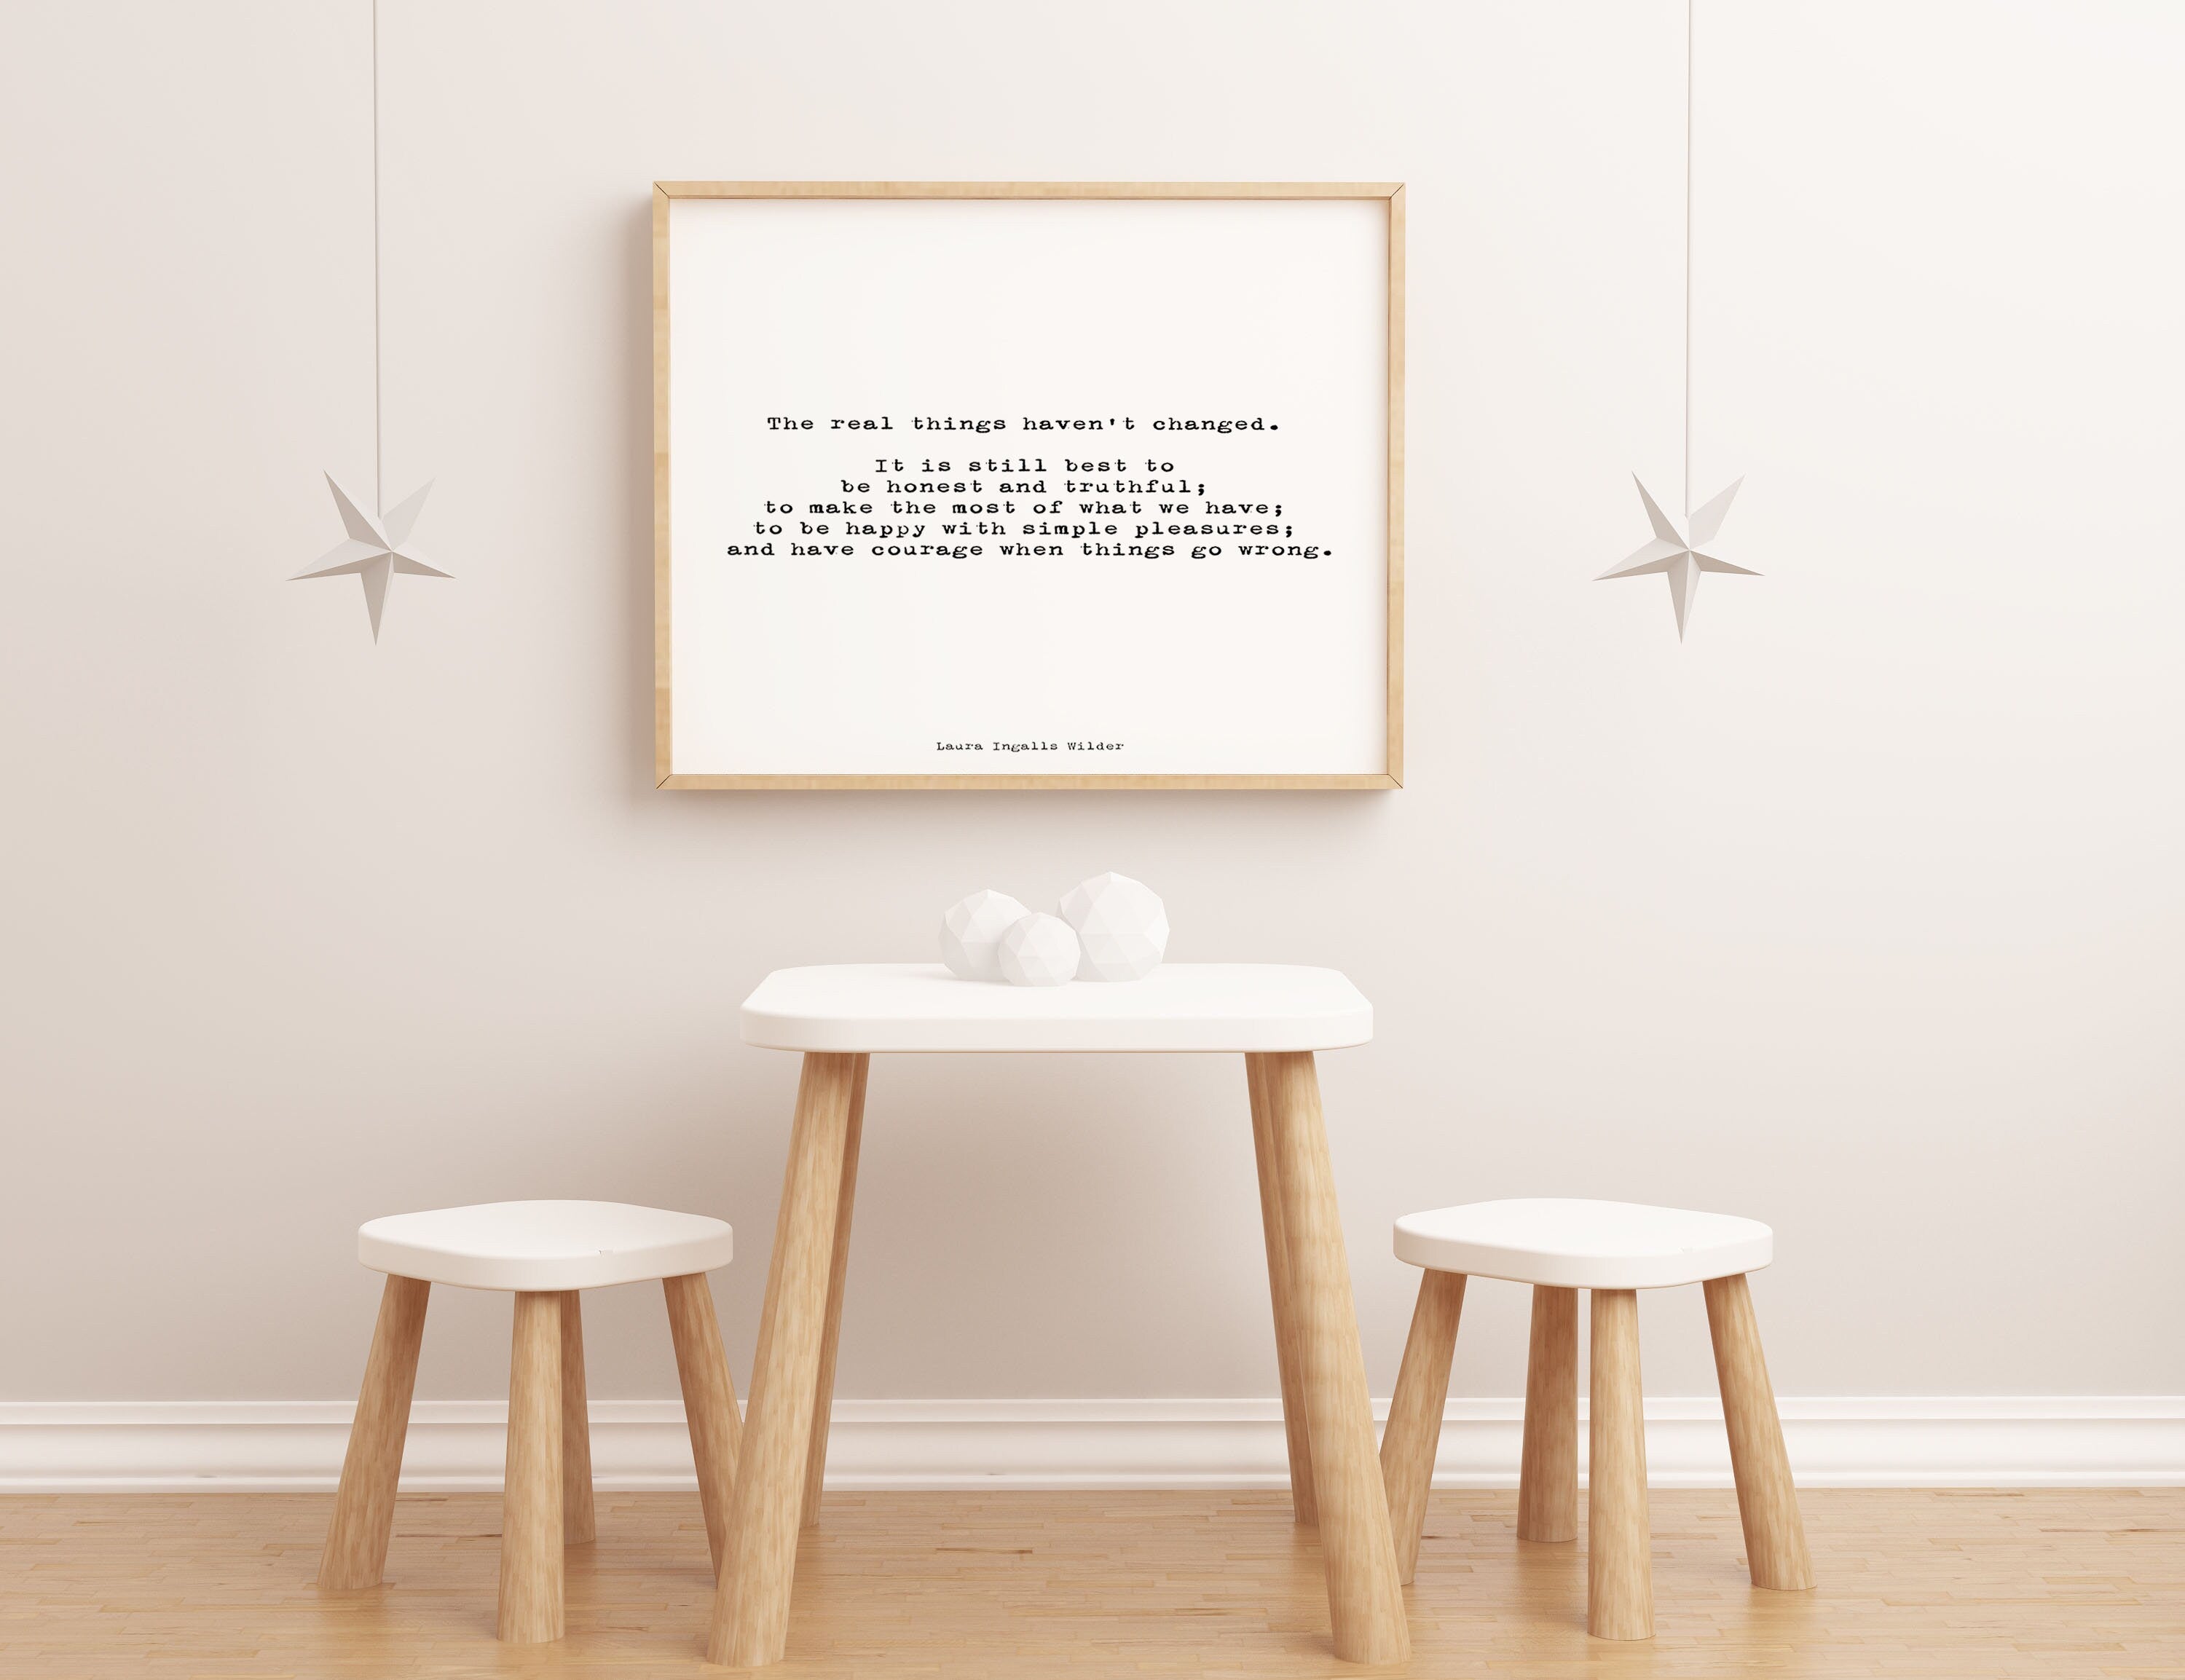 Inspirational quote print featuring a Laura Ingalls Wilder quote, unframed wall art quote print